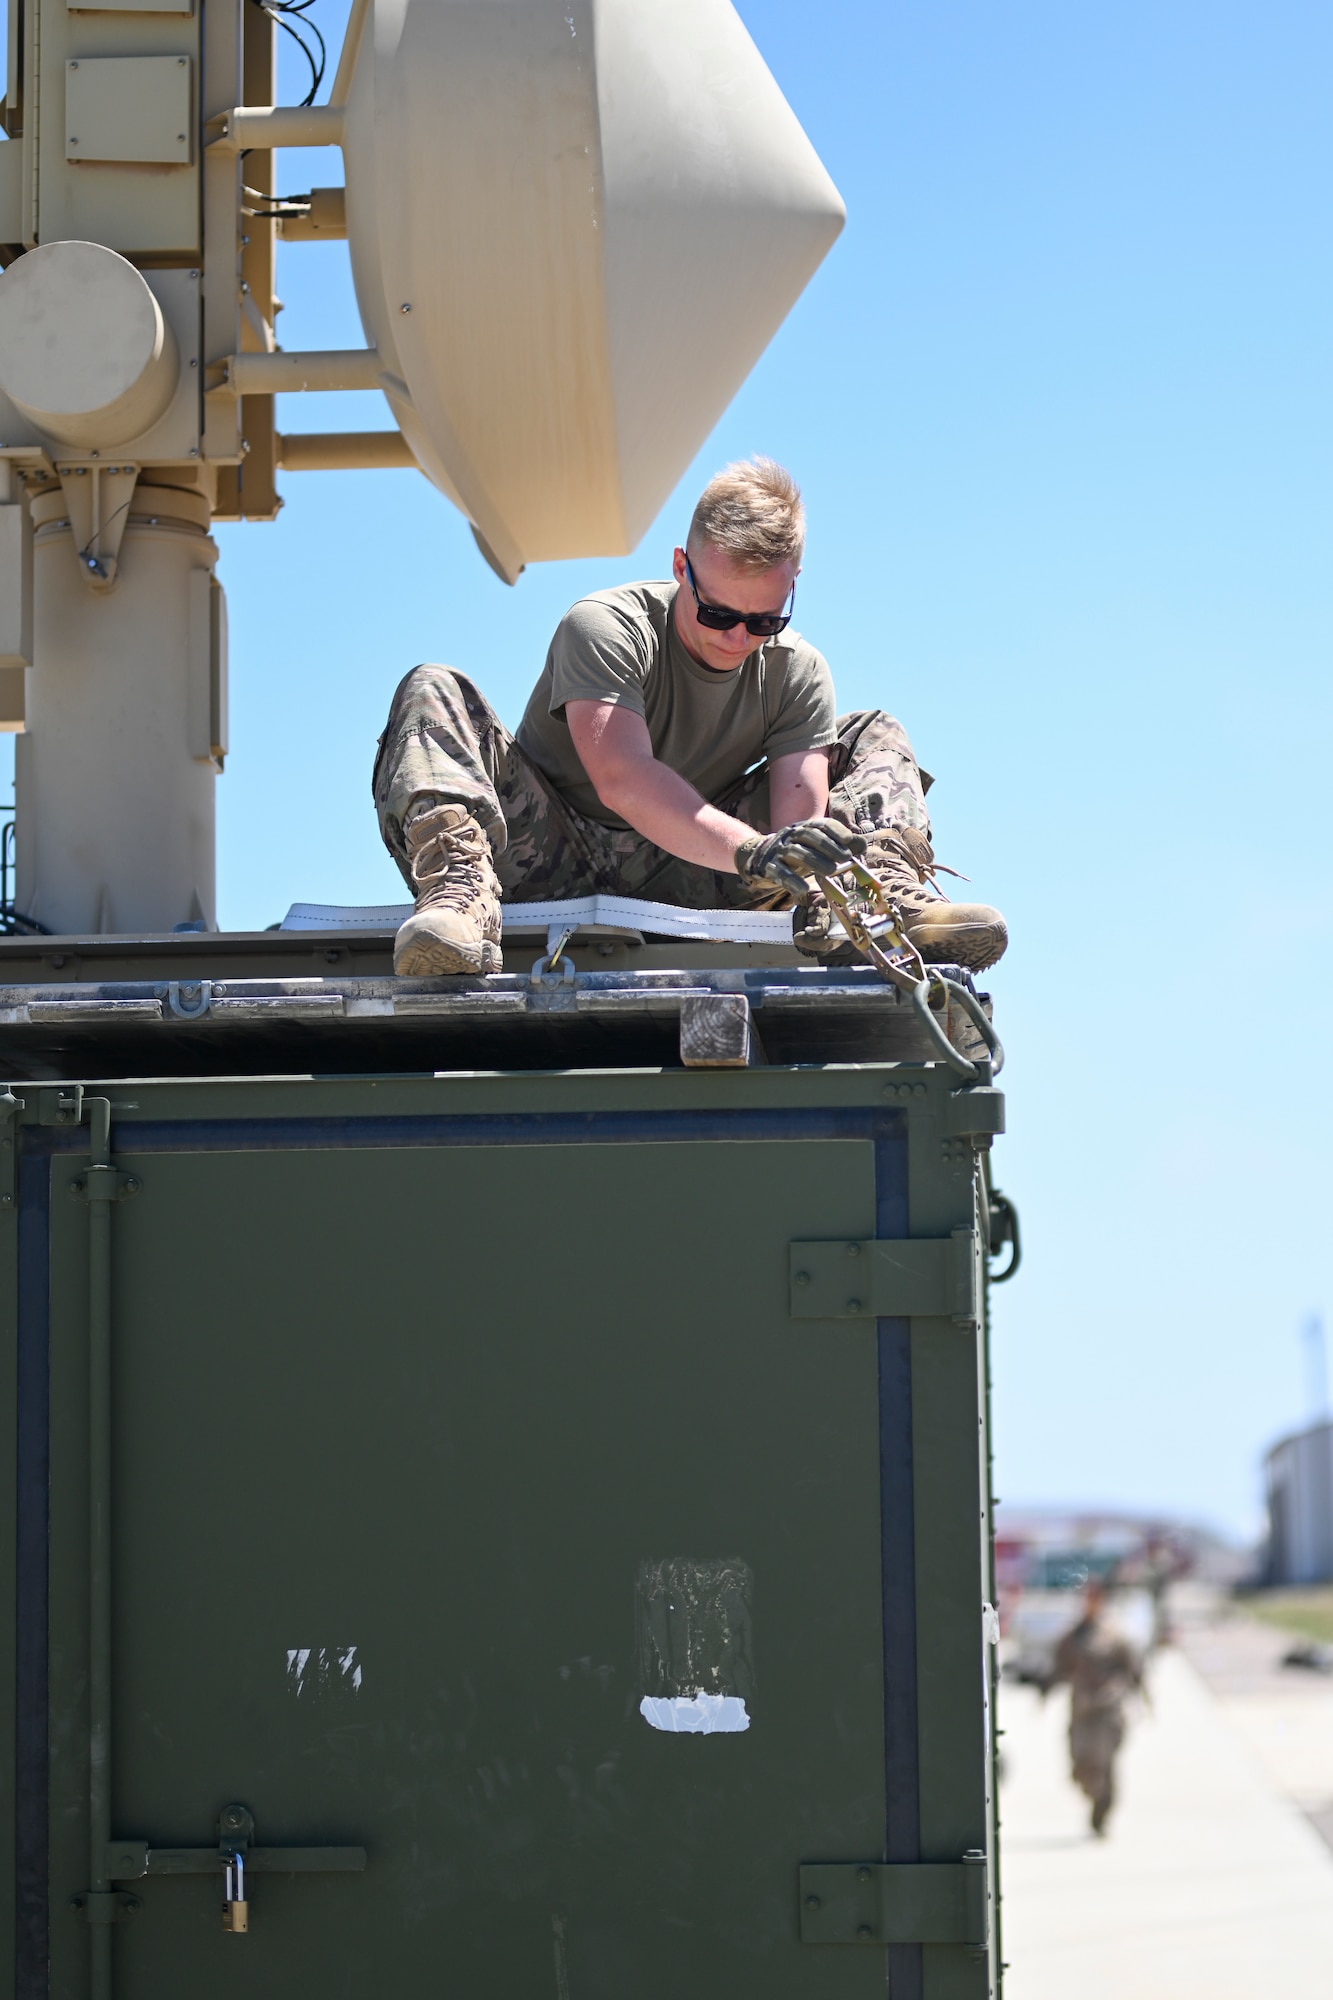 Senior Airman Brendan Hoffman, 727th Special Operations Aircraft Maintenance Squadron ground control station technician, secures a satellite on a shipping container, April 20, 2021, on Point Mugu Naval Air Station, California. Airmen and Guardians from the 49th Wing, Holloman Air Force Base, New Mexico; 452nd Air Mobility Wing, March Air Reserve Base, California; 27th Special Operations Wing, Cannon Air Force Base, New Mexico, and the 432nd Air Expeditionary Wing, Creech AFB, Nevada, joined to execute Exercise Agile Reaper. (U.S. Air Force photo by Senior Airman Kristin Weathersby)